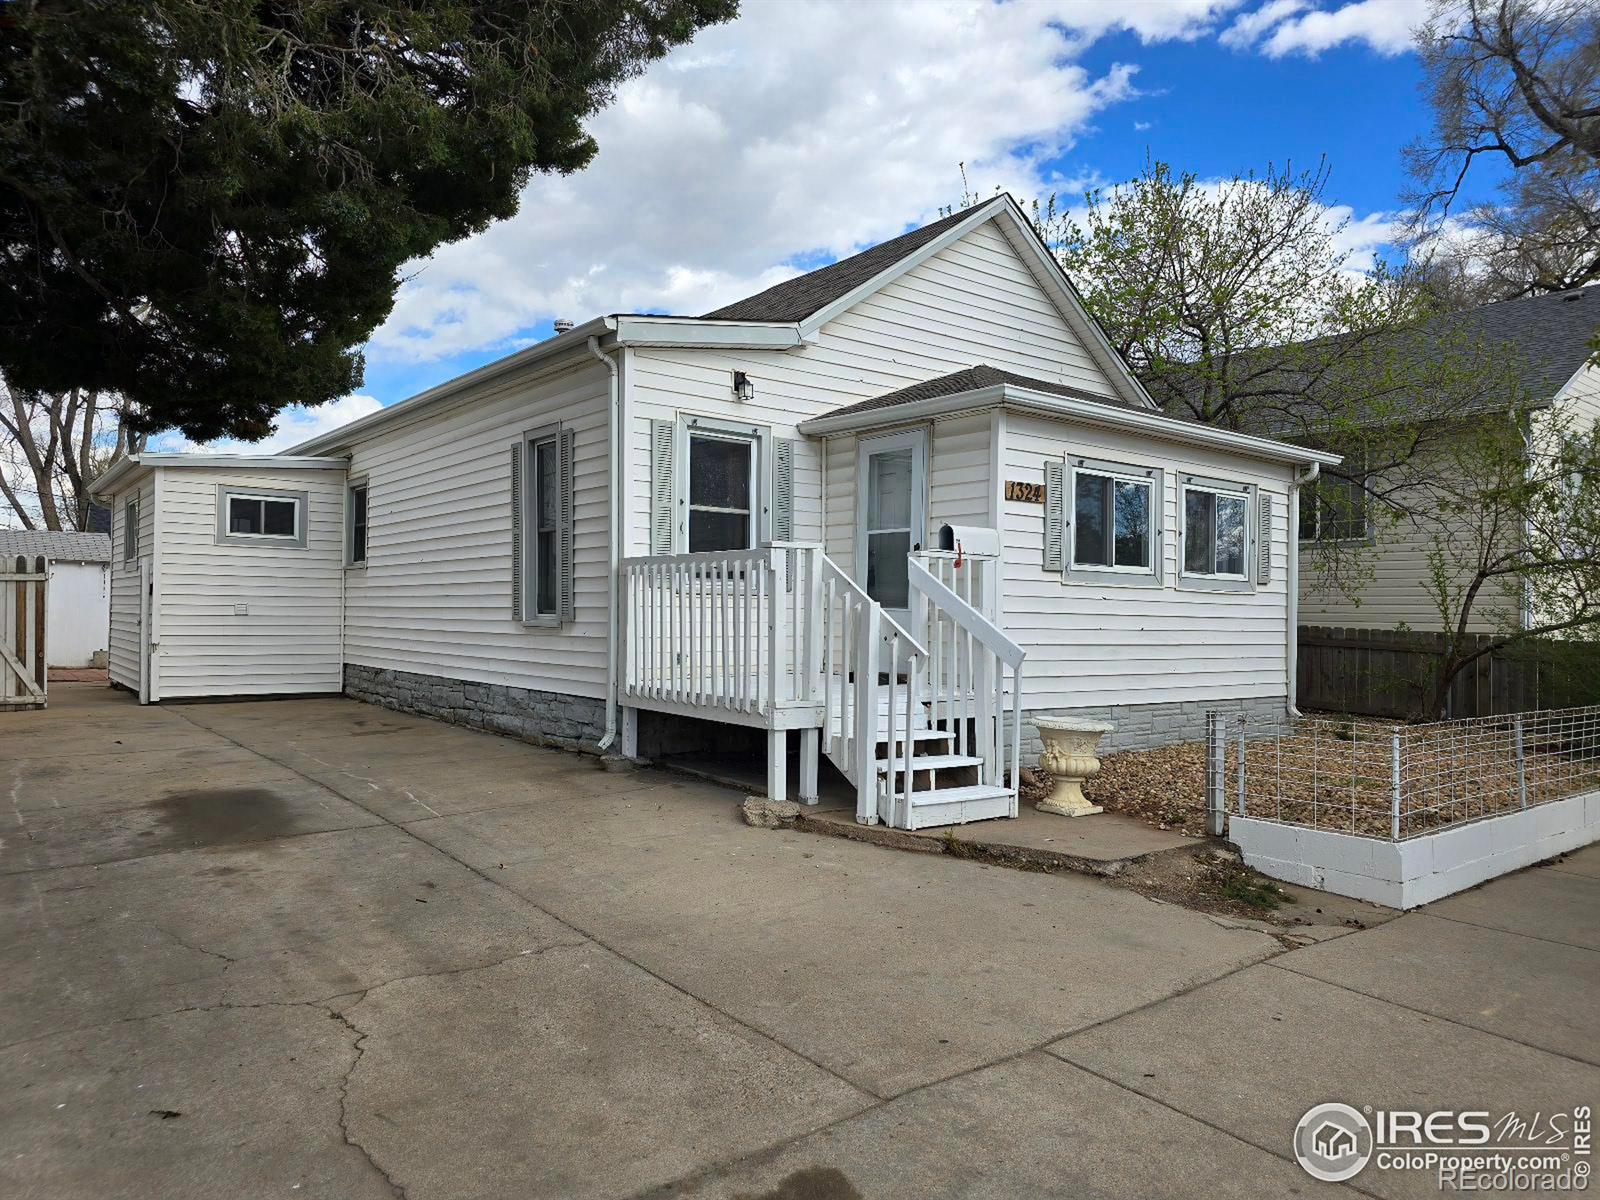 1324  7th Avenue, greeley MLS: 4567891007880 Beds: 3 Baths: 1 Price: $289,000